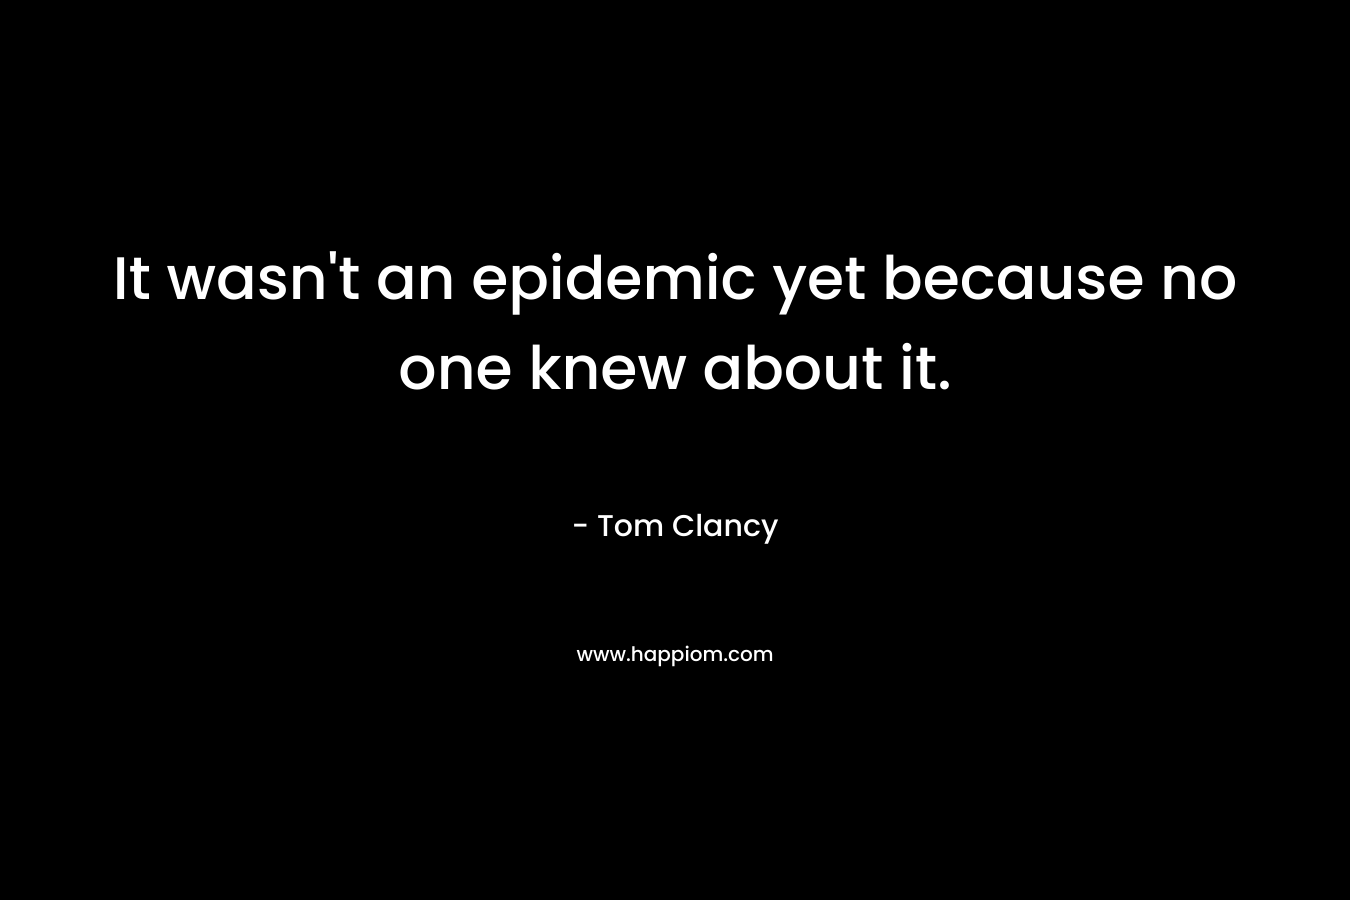 It wasn’t an epidemic yet because no one knew about it. – Tom Clancy